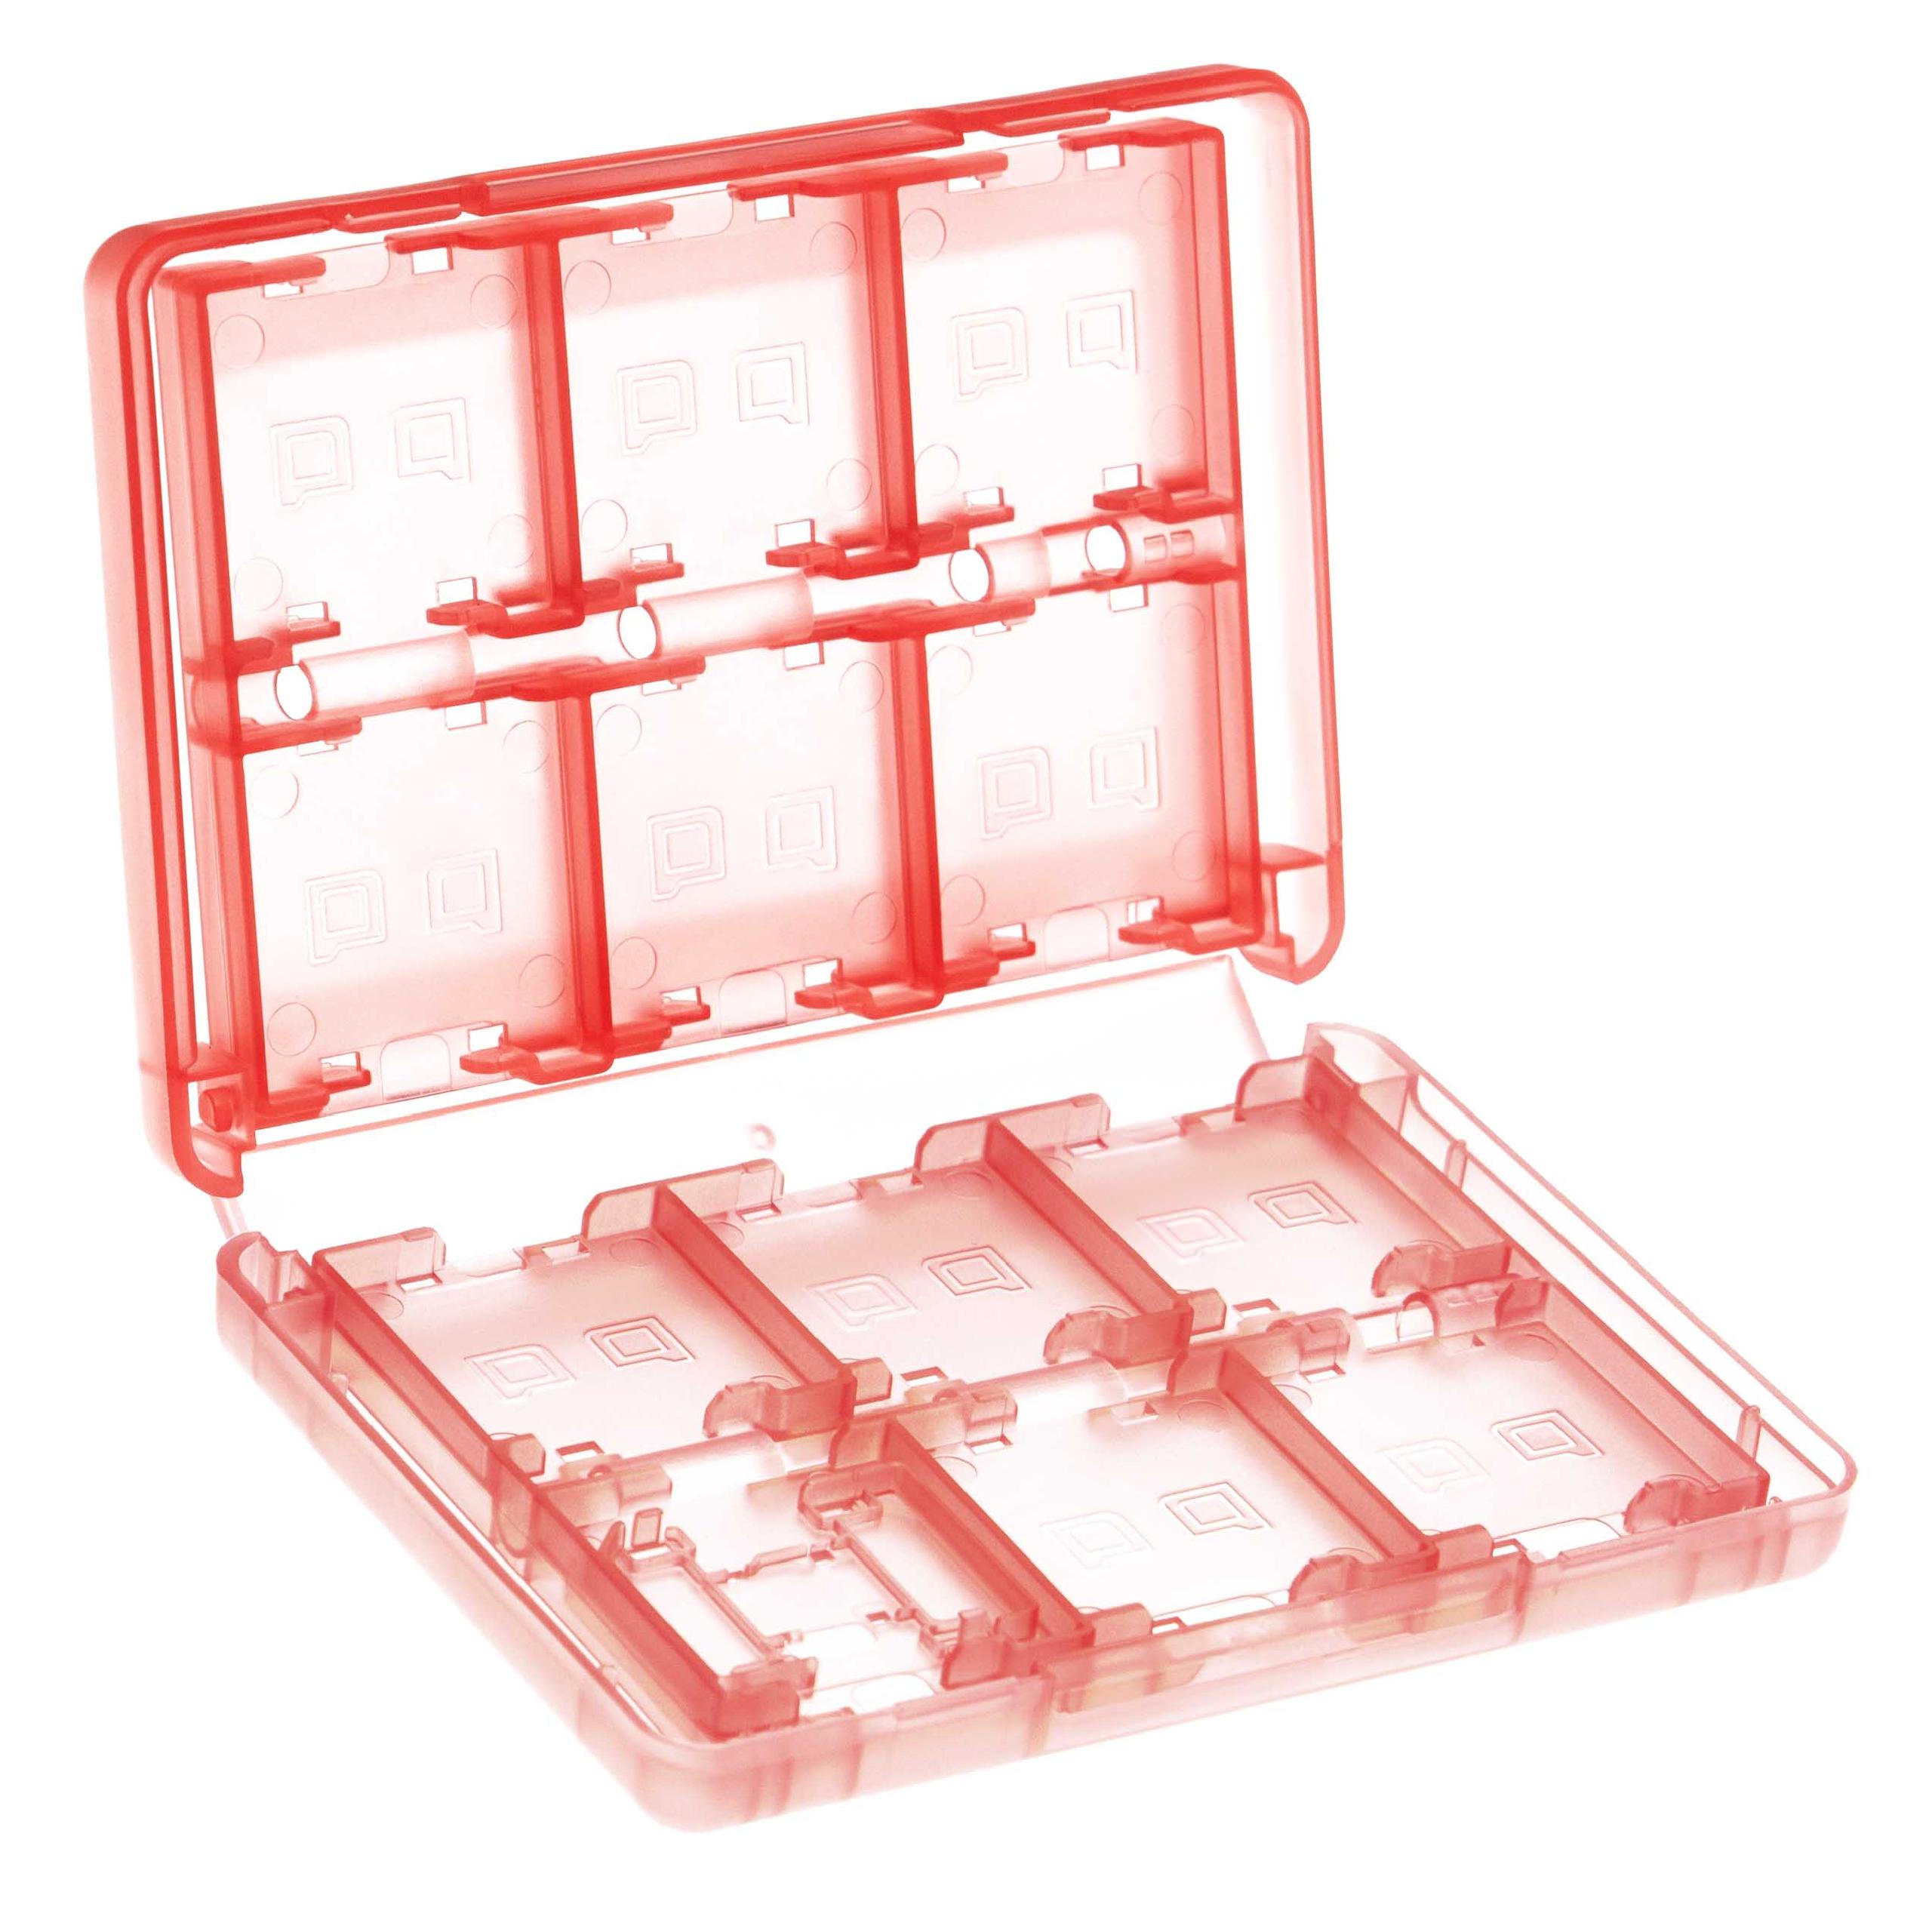 Carry Case for Nintendo Accessories - 3DS, 3DS LL, 3DS XL, DS Lite, DSi, transparent, red